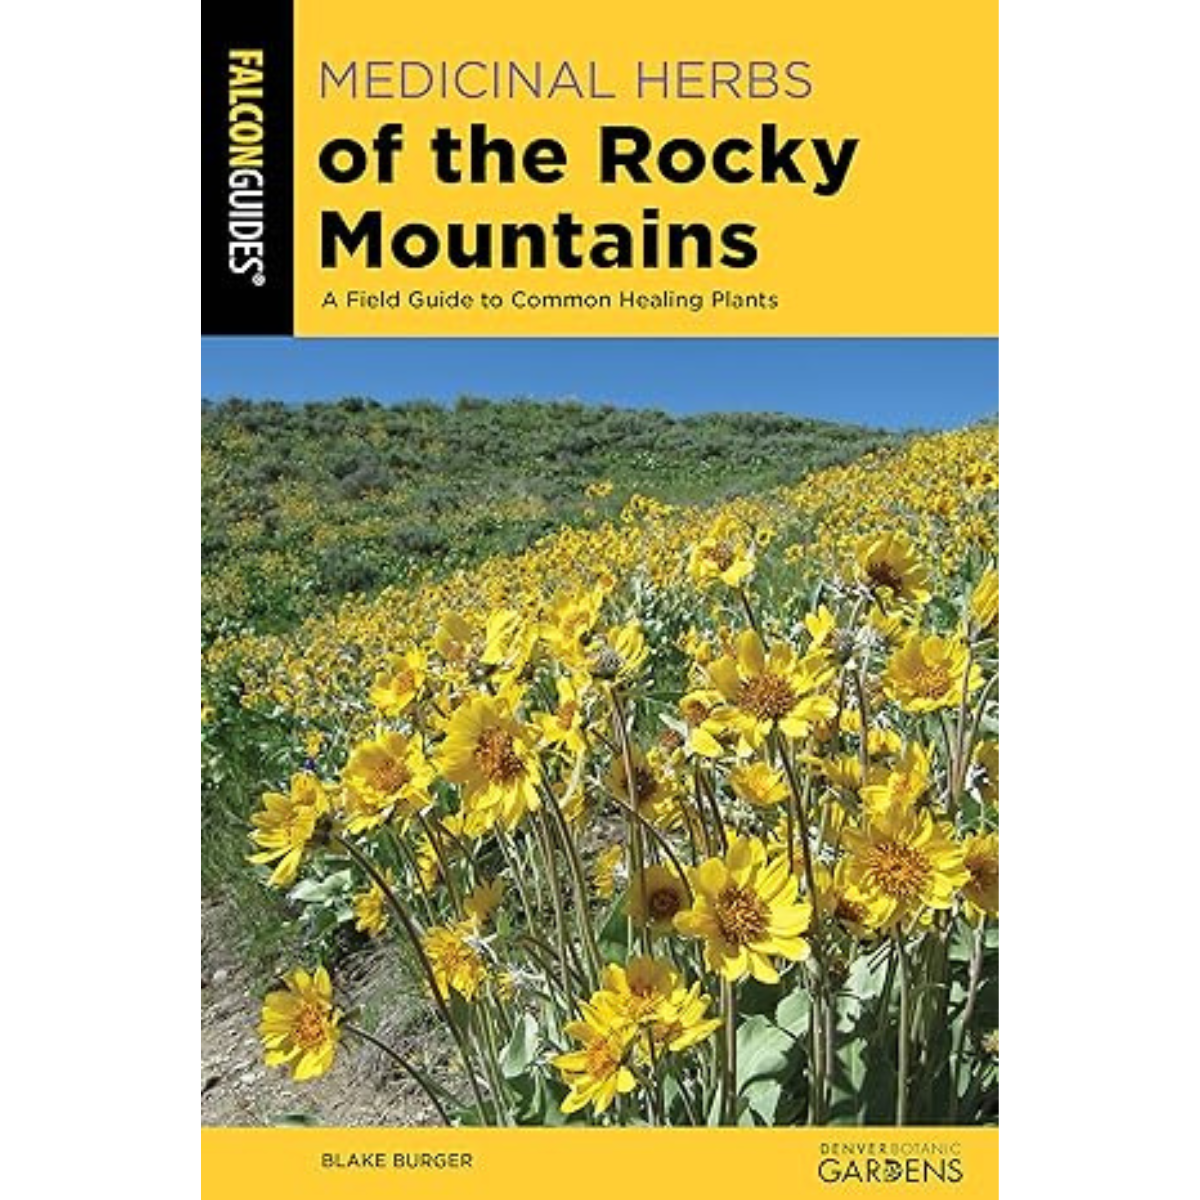 Medicinal Herbs of the Rocky Mountains: A Field Guide to Common Healing Plants